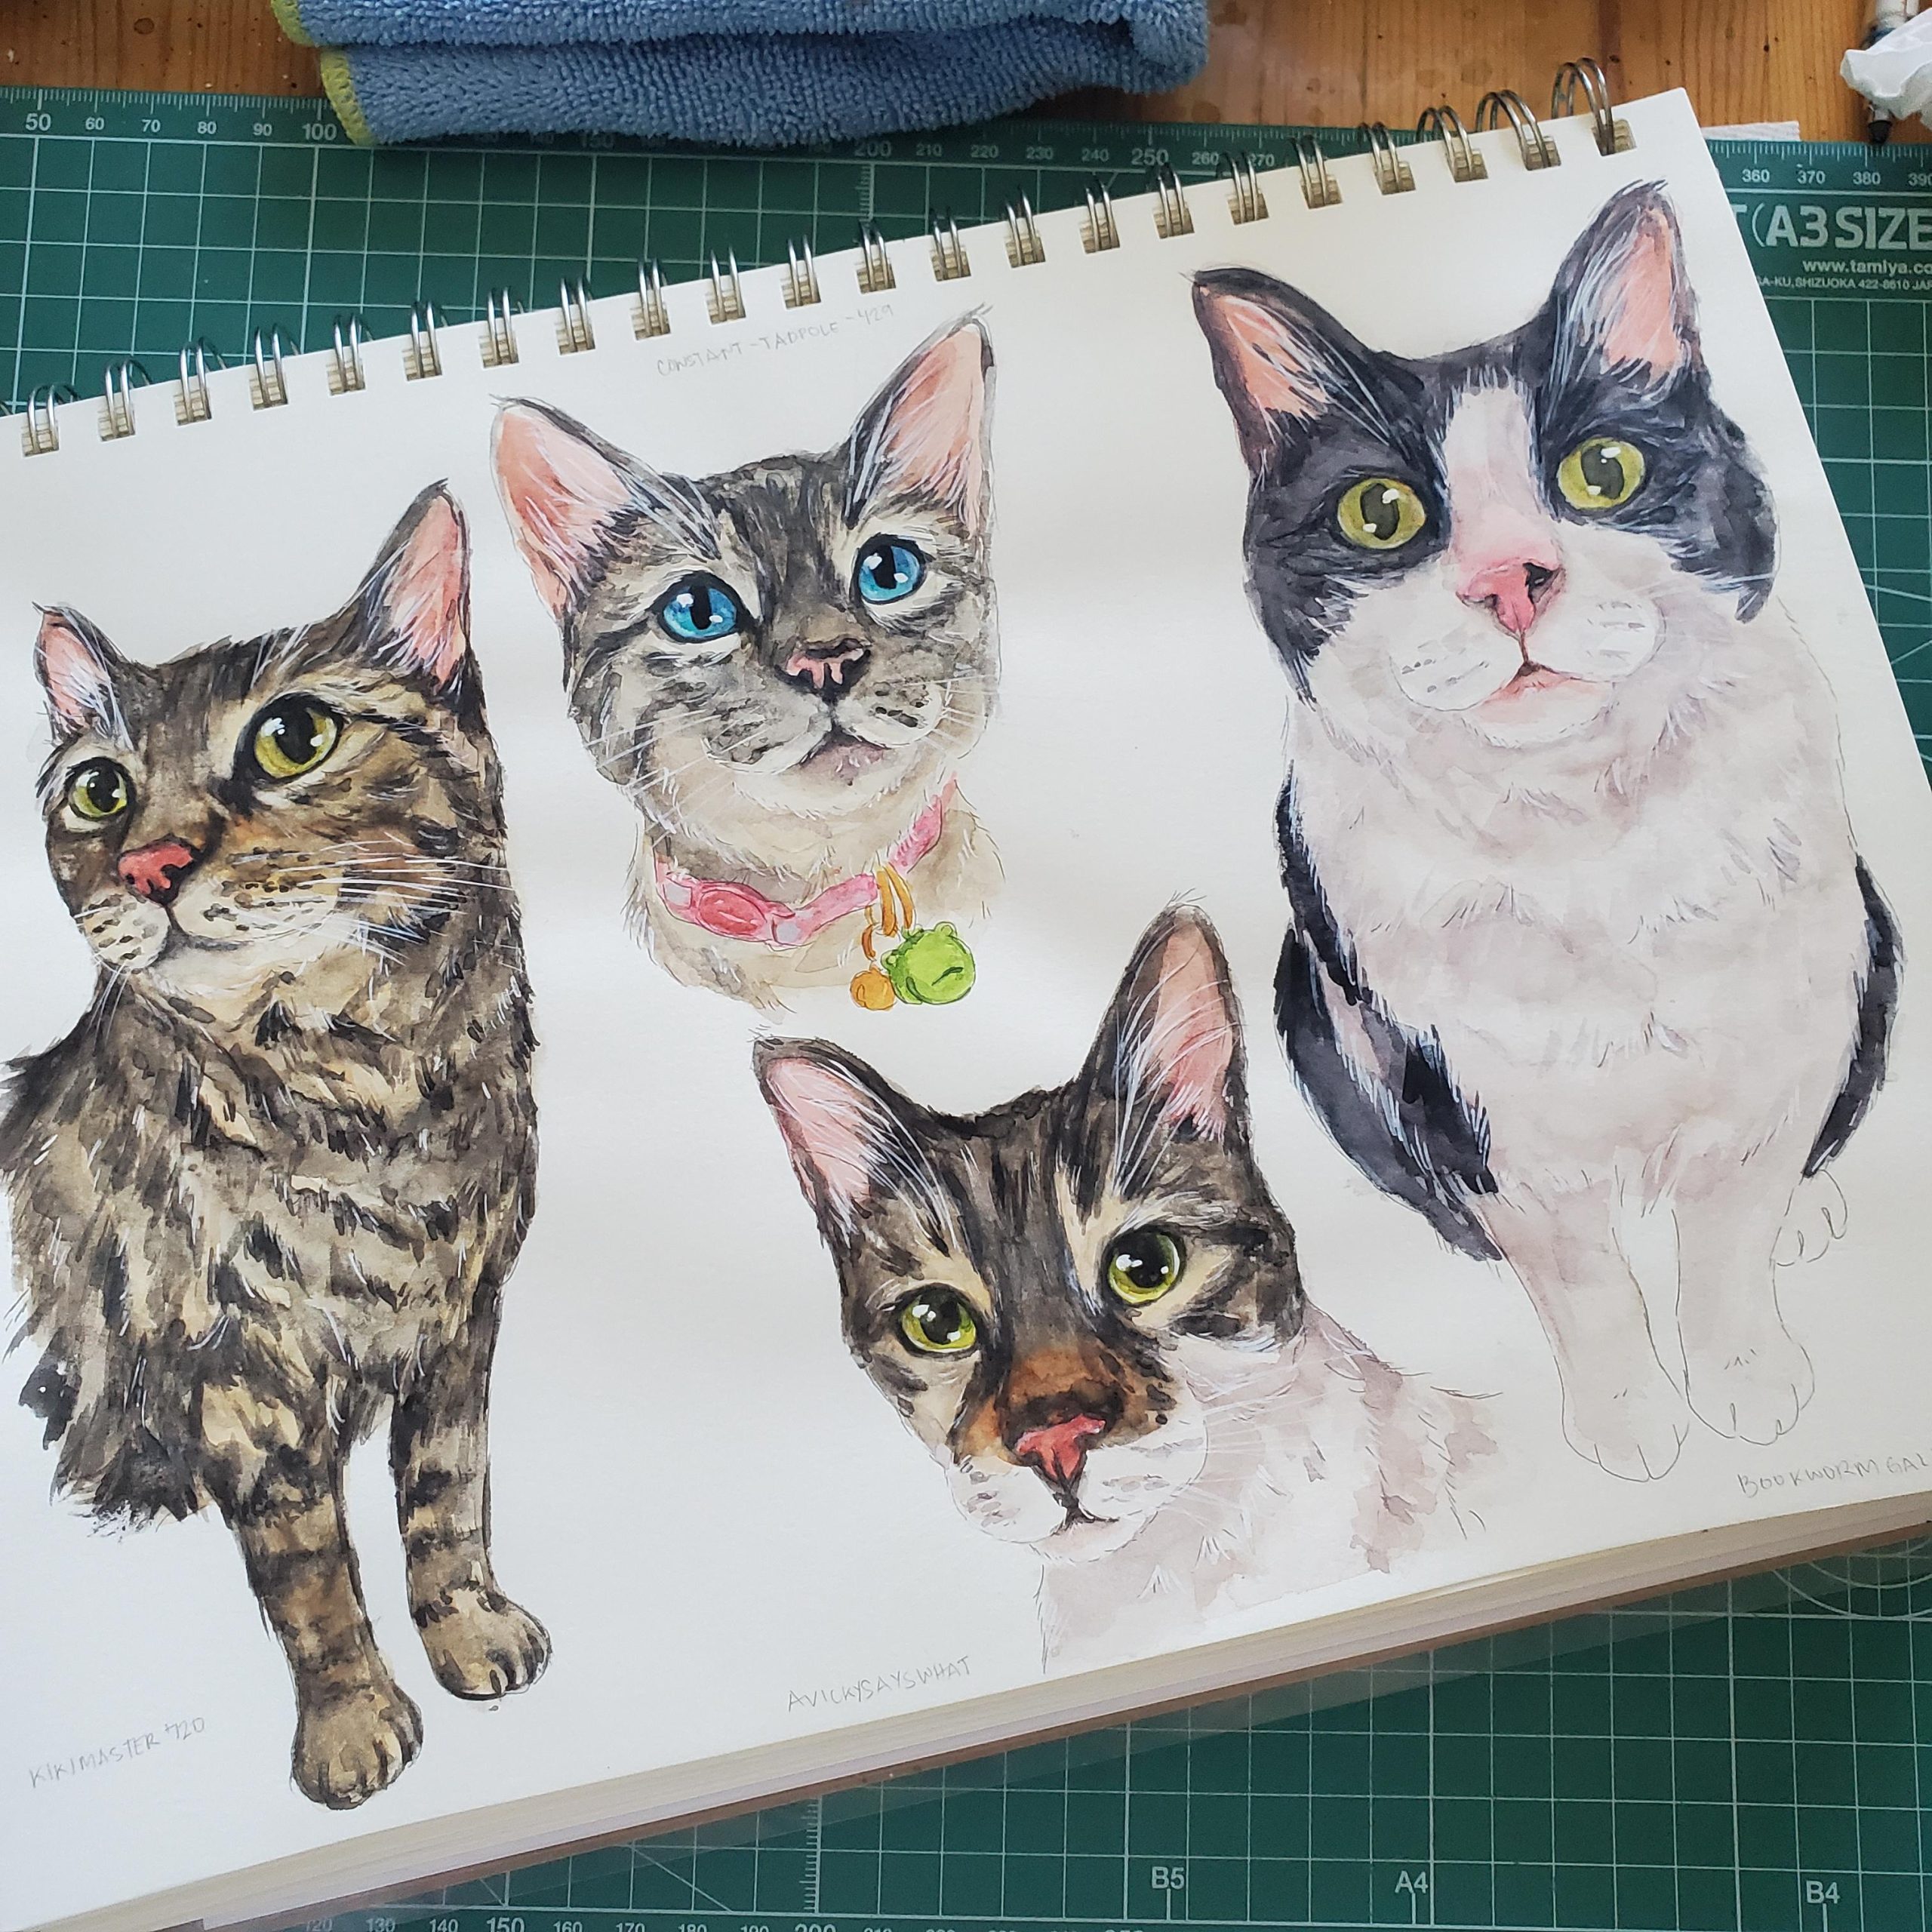 Painted more cats in my sketchbook to honour their memory